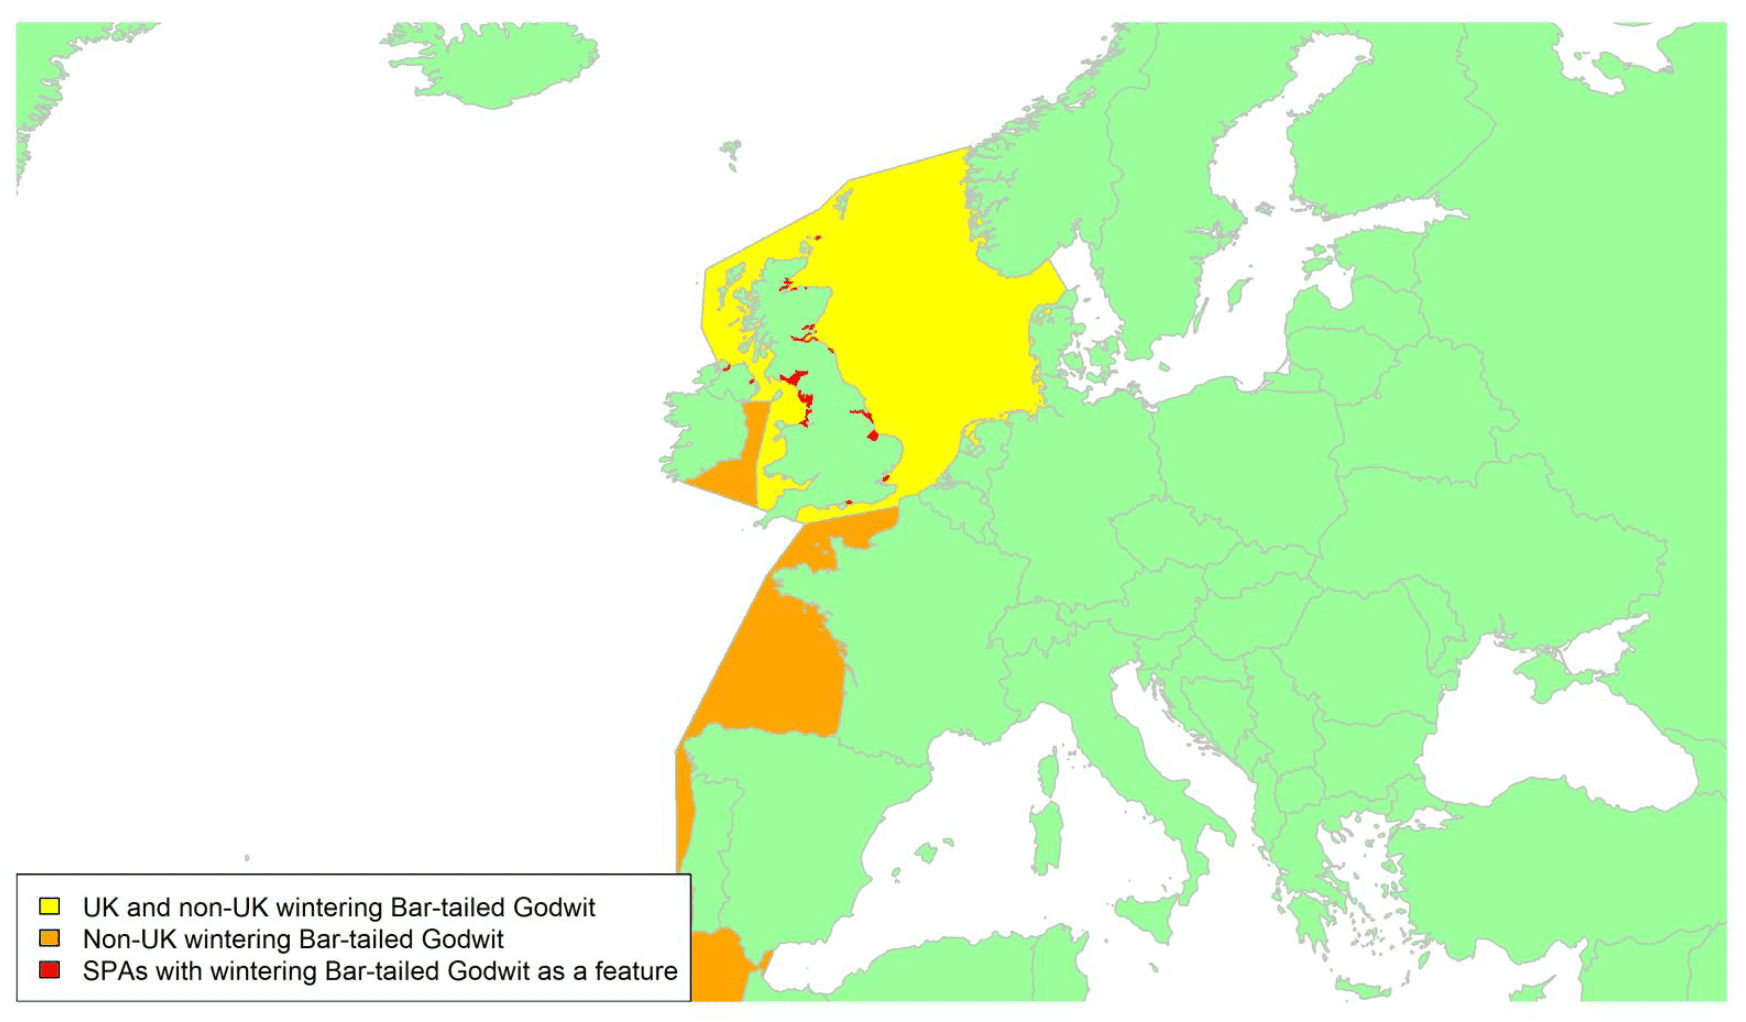 Map of North West Europe showing migratory routes and SPAs within the UK for Bar-tailed Godwit as described in the text below.